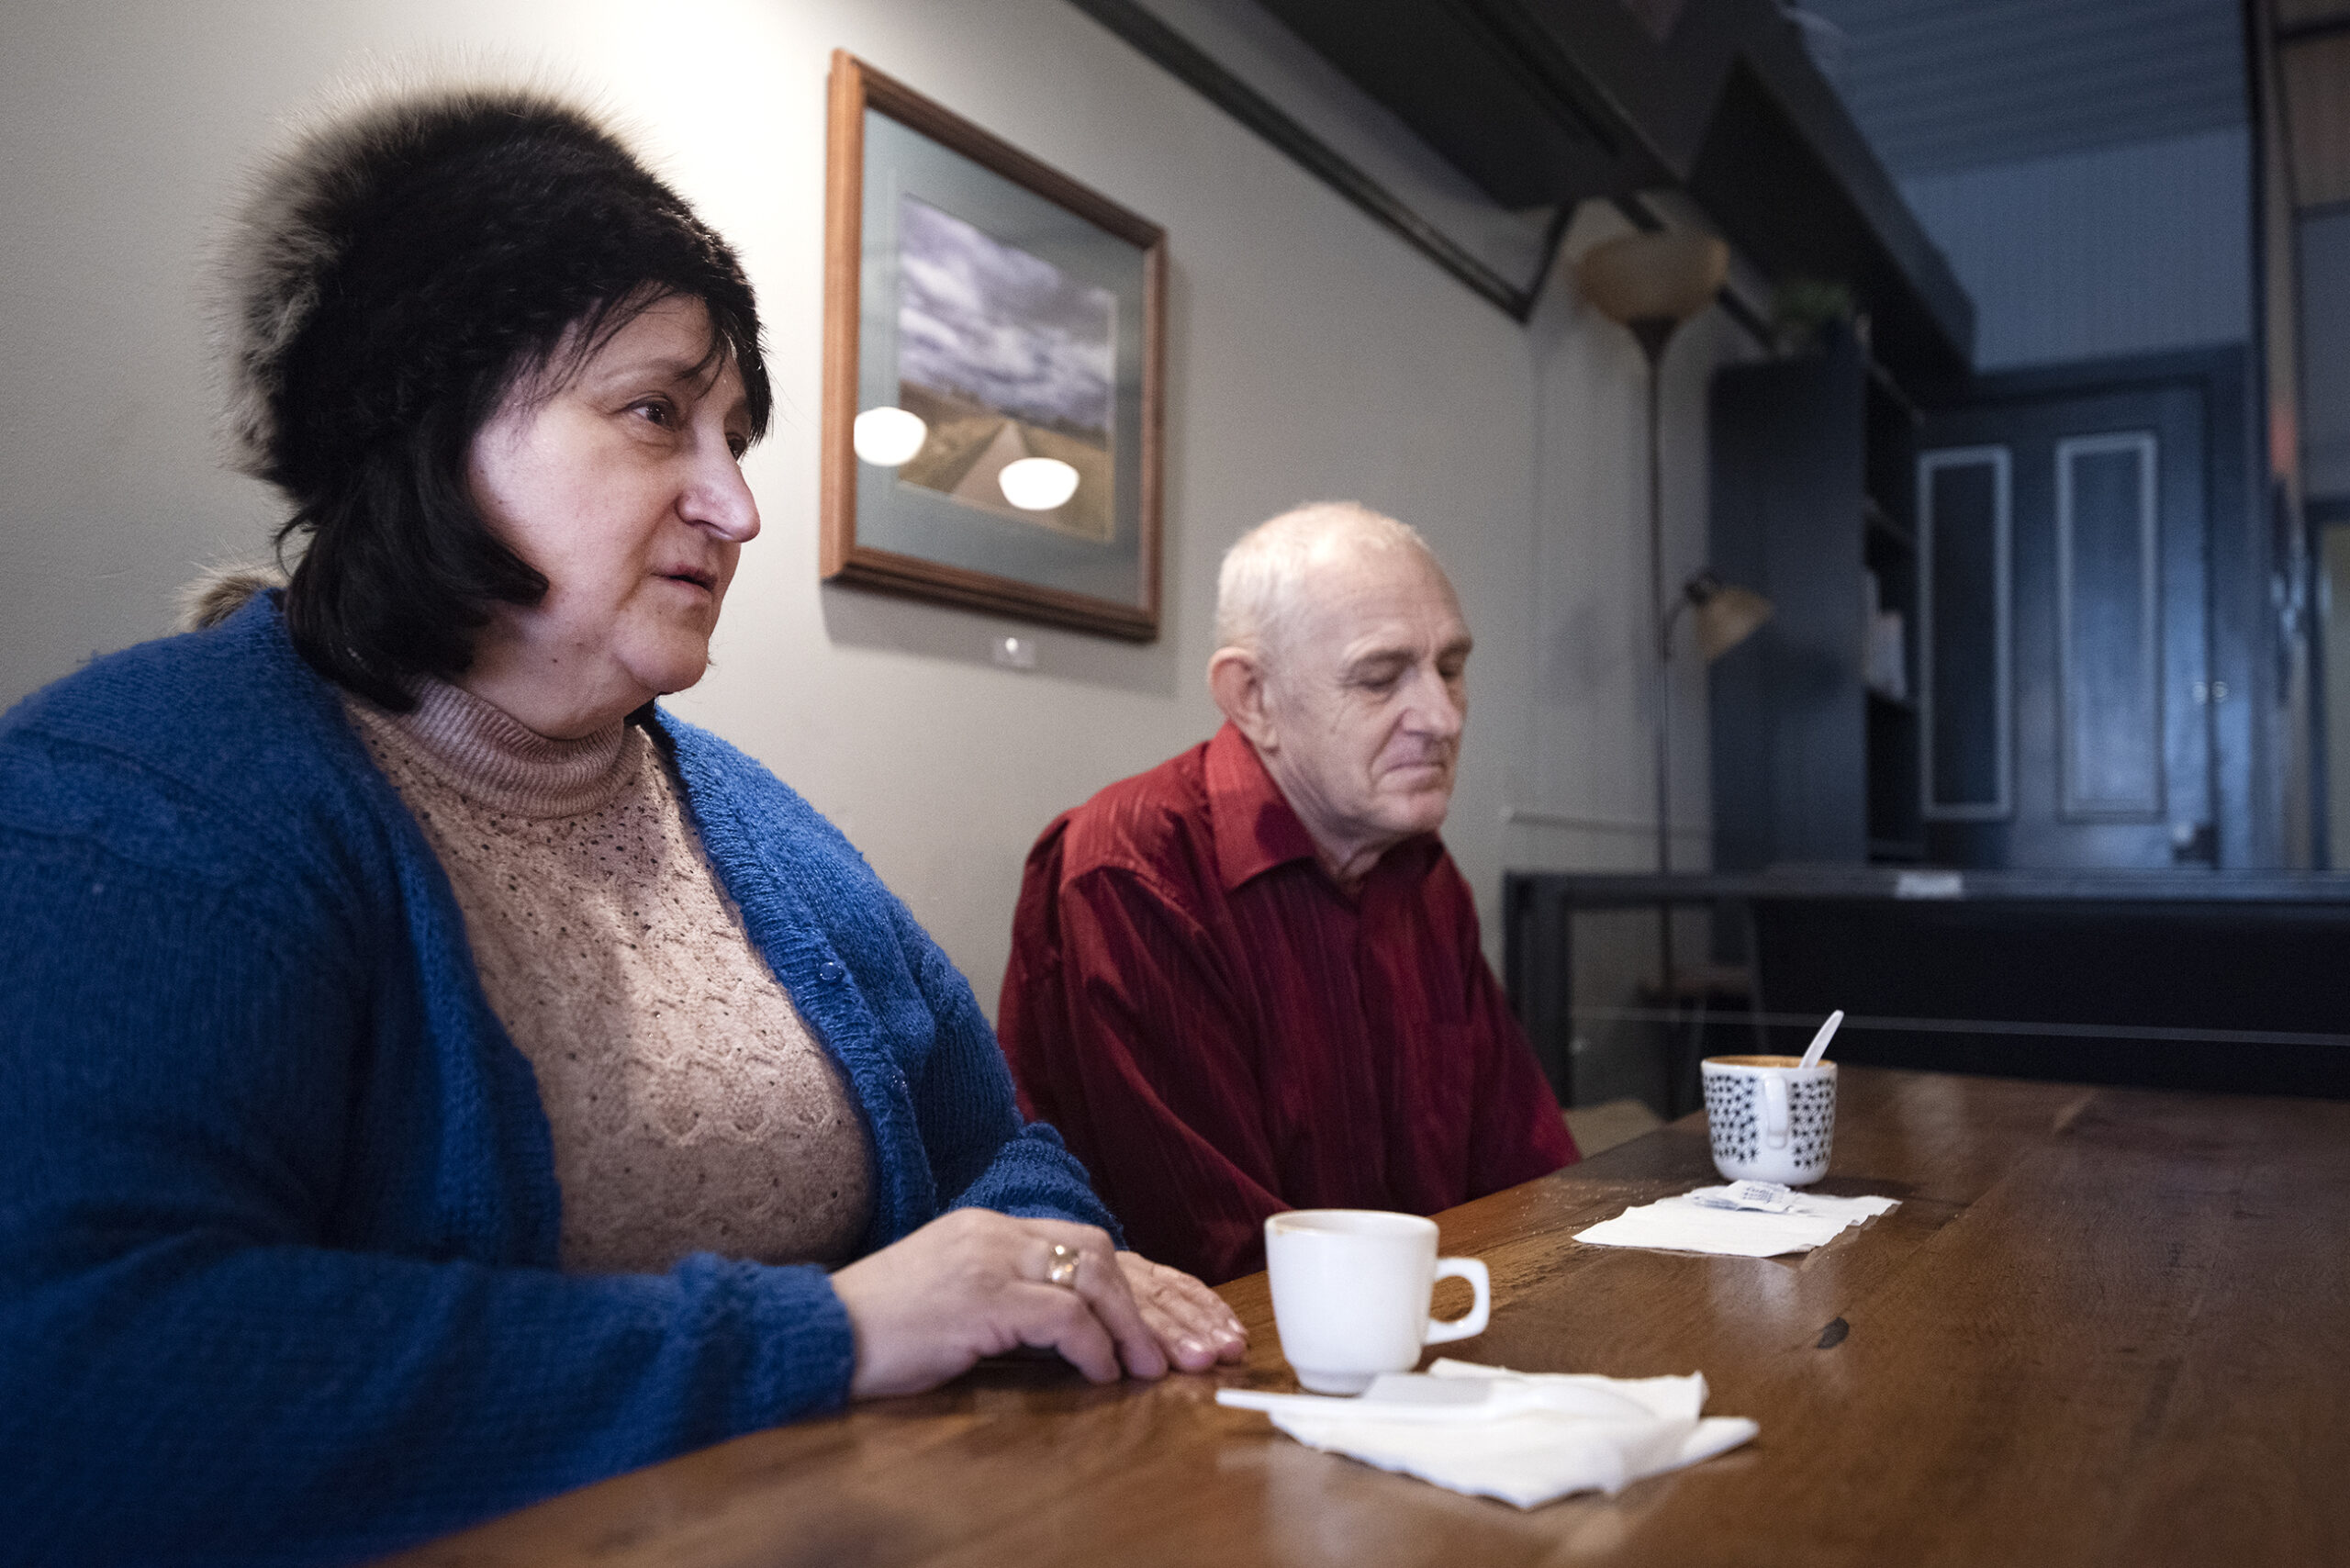 Tanya and Slava sit at a table with coffee.